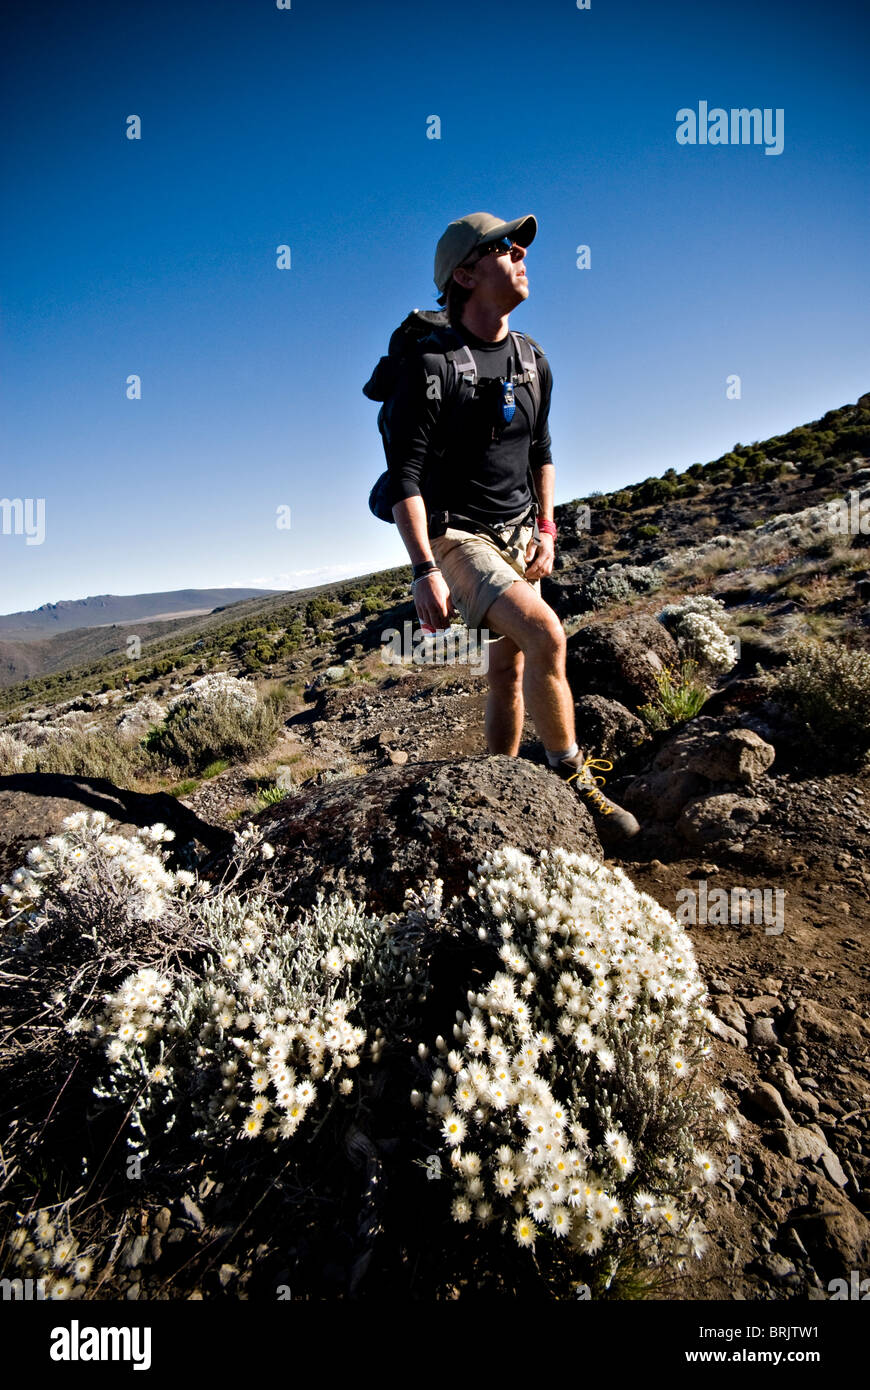 A young man hikes near alpine flowers in the high desert below Mt. Kilimanjaro. Stock Photo